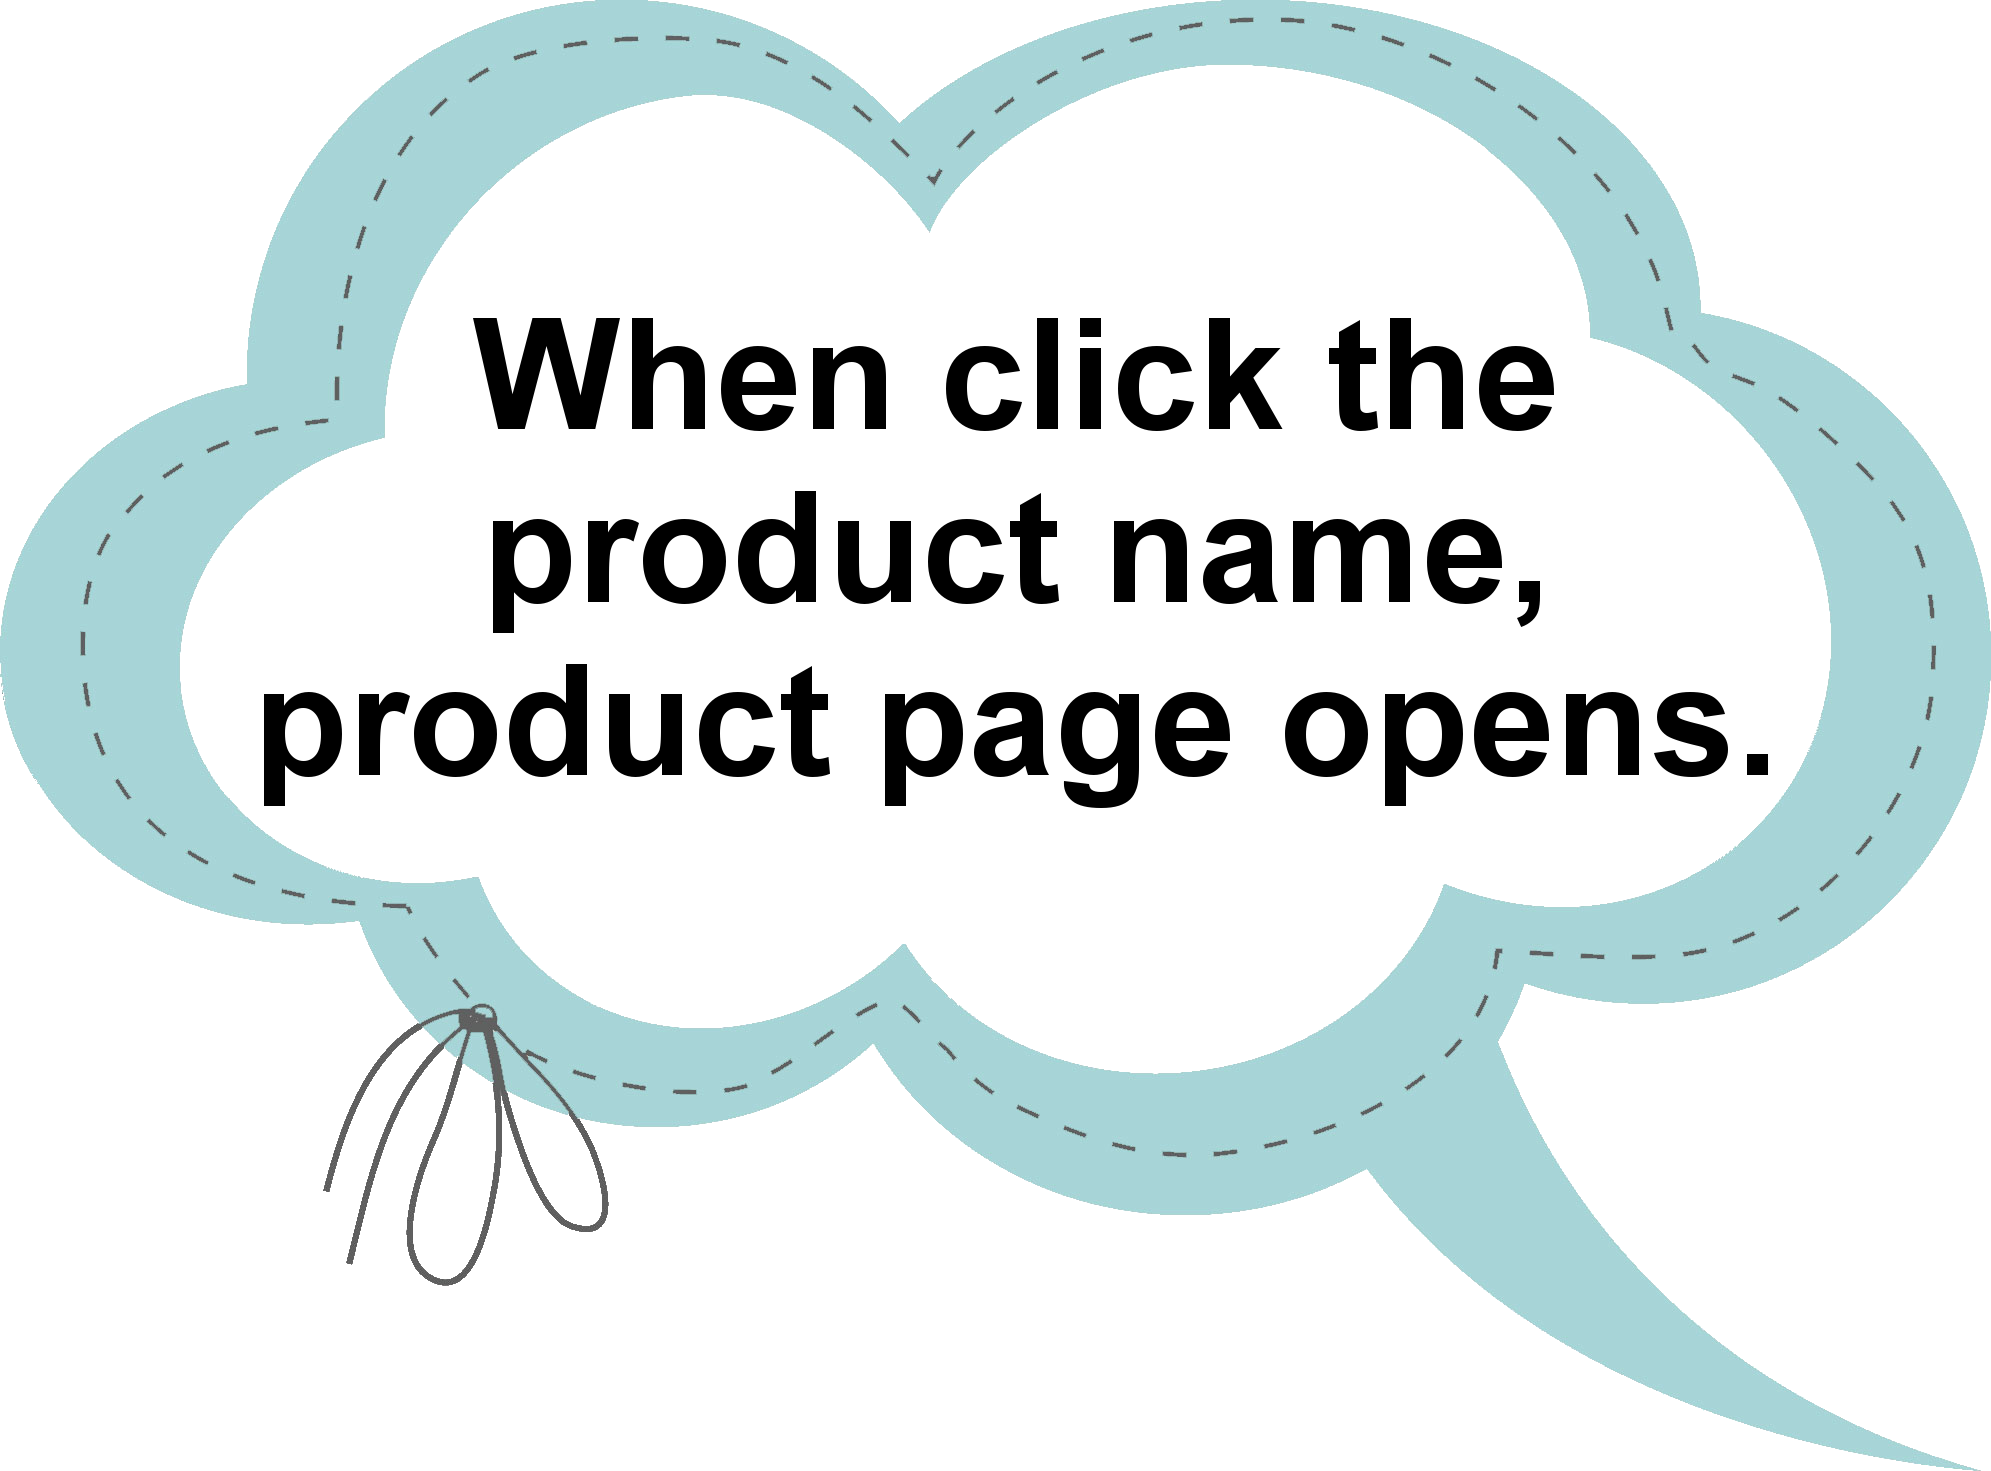 When click the product name, product page opens.